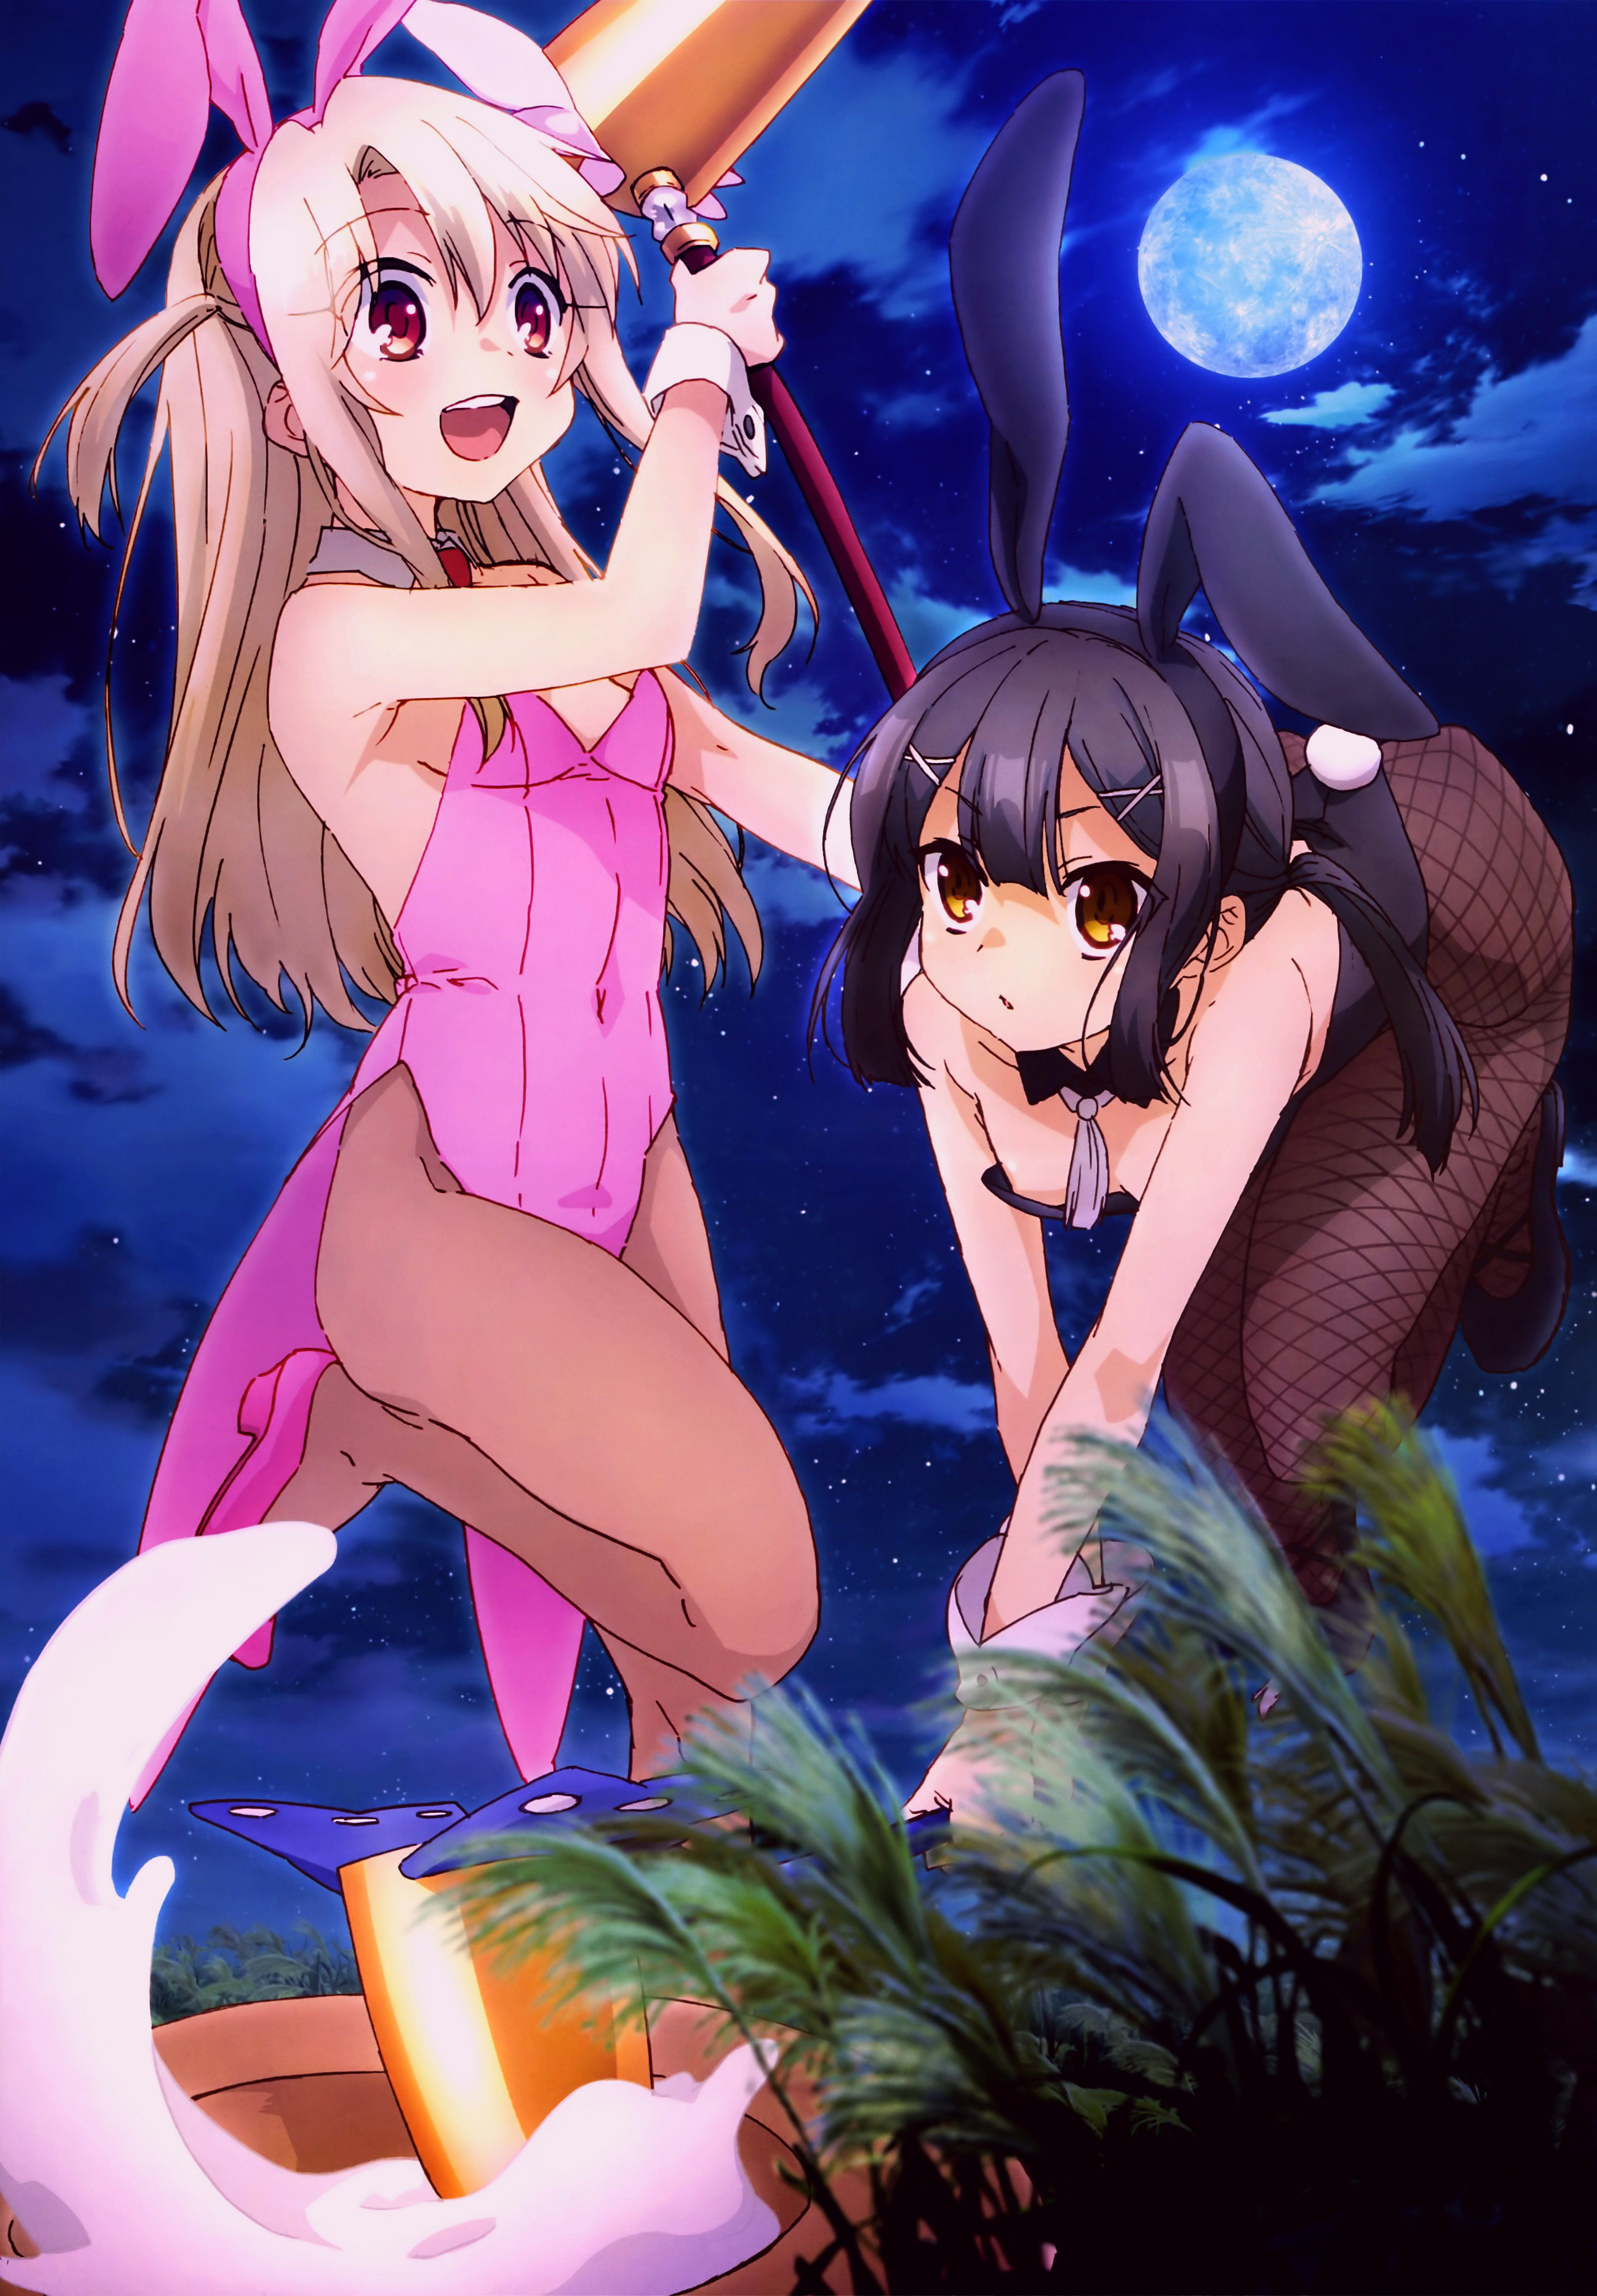 【Lori Bunny-chan】 Secondary erotic image that makes you want to see the moon with Usagi chan in the rabbit ear bunny girl of the secondary loli girl 52